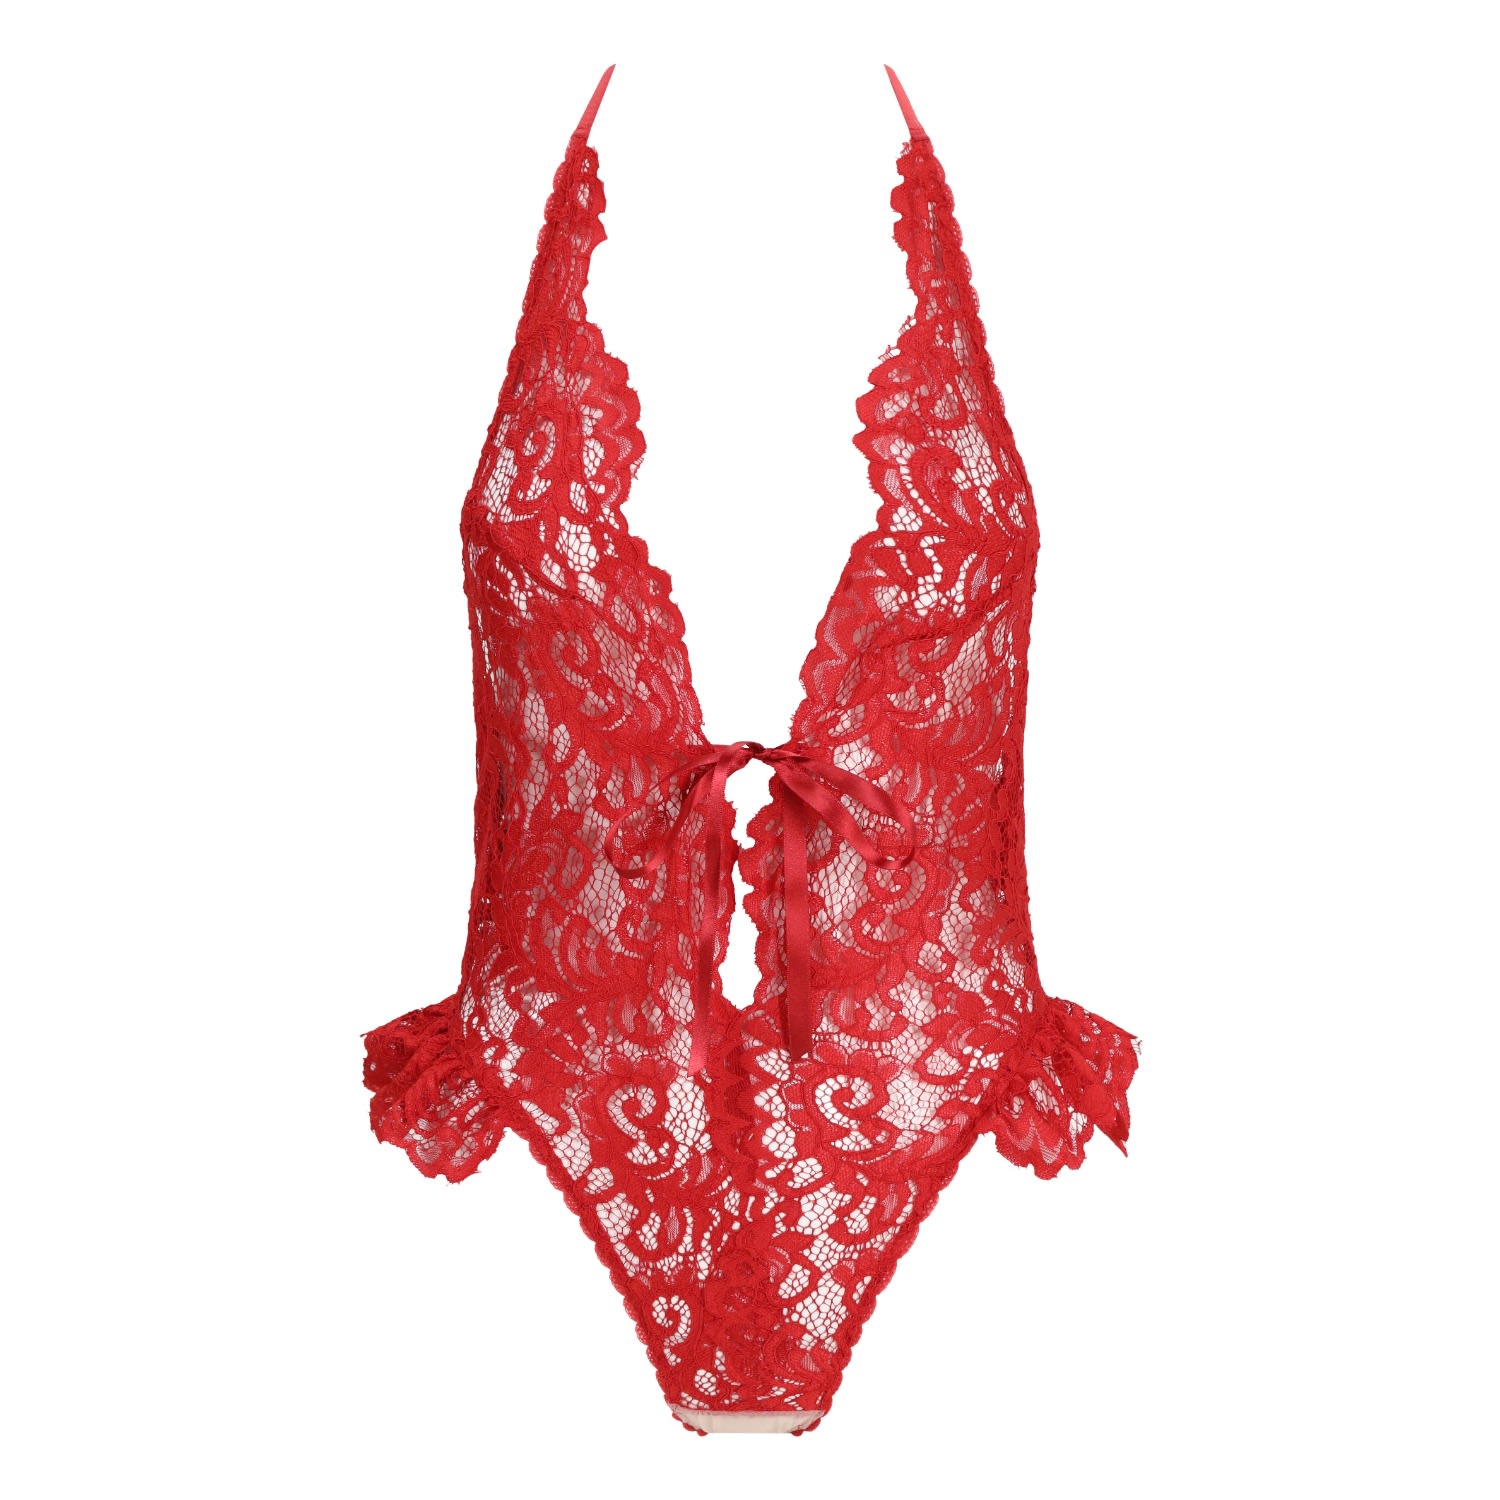 Belle-et-bonbon Women's Red Valentina Bright Cherry Lace Body Valentines Gift Wrapped